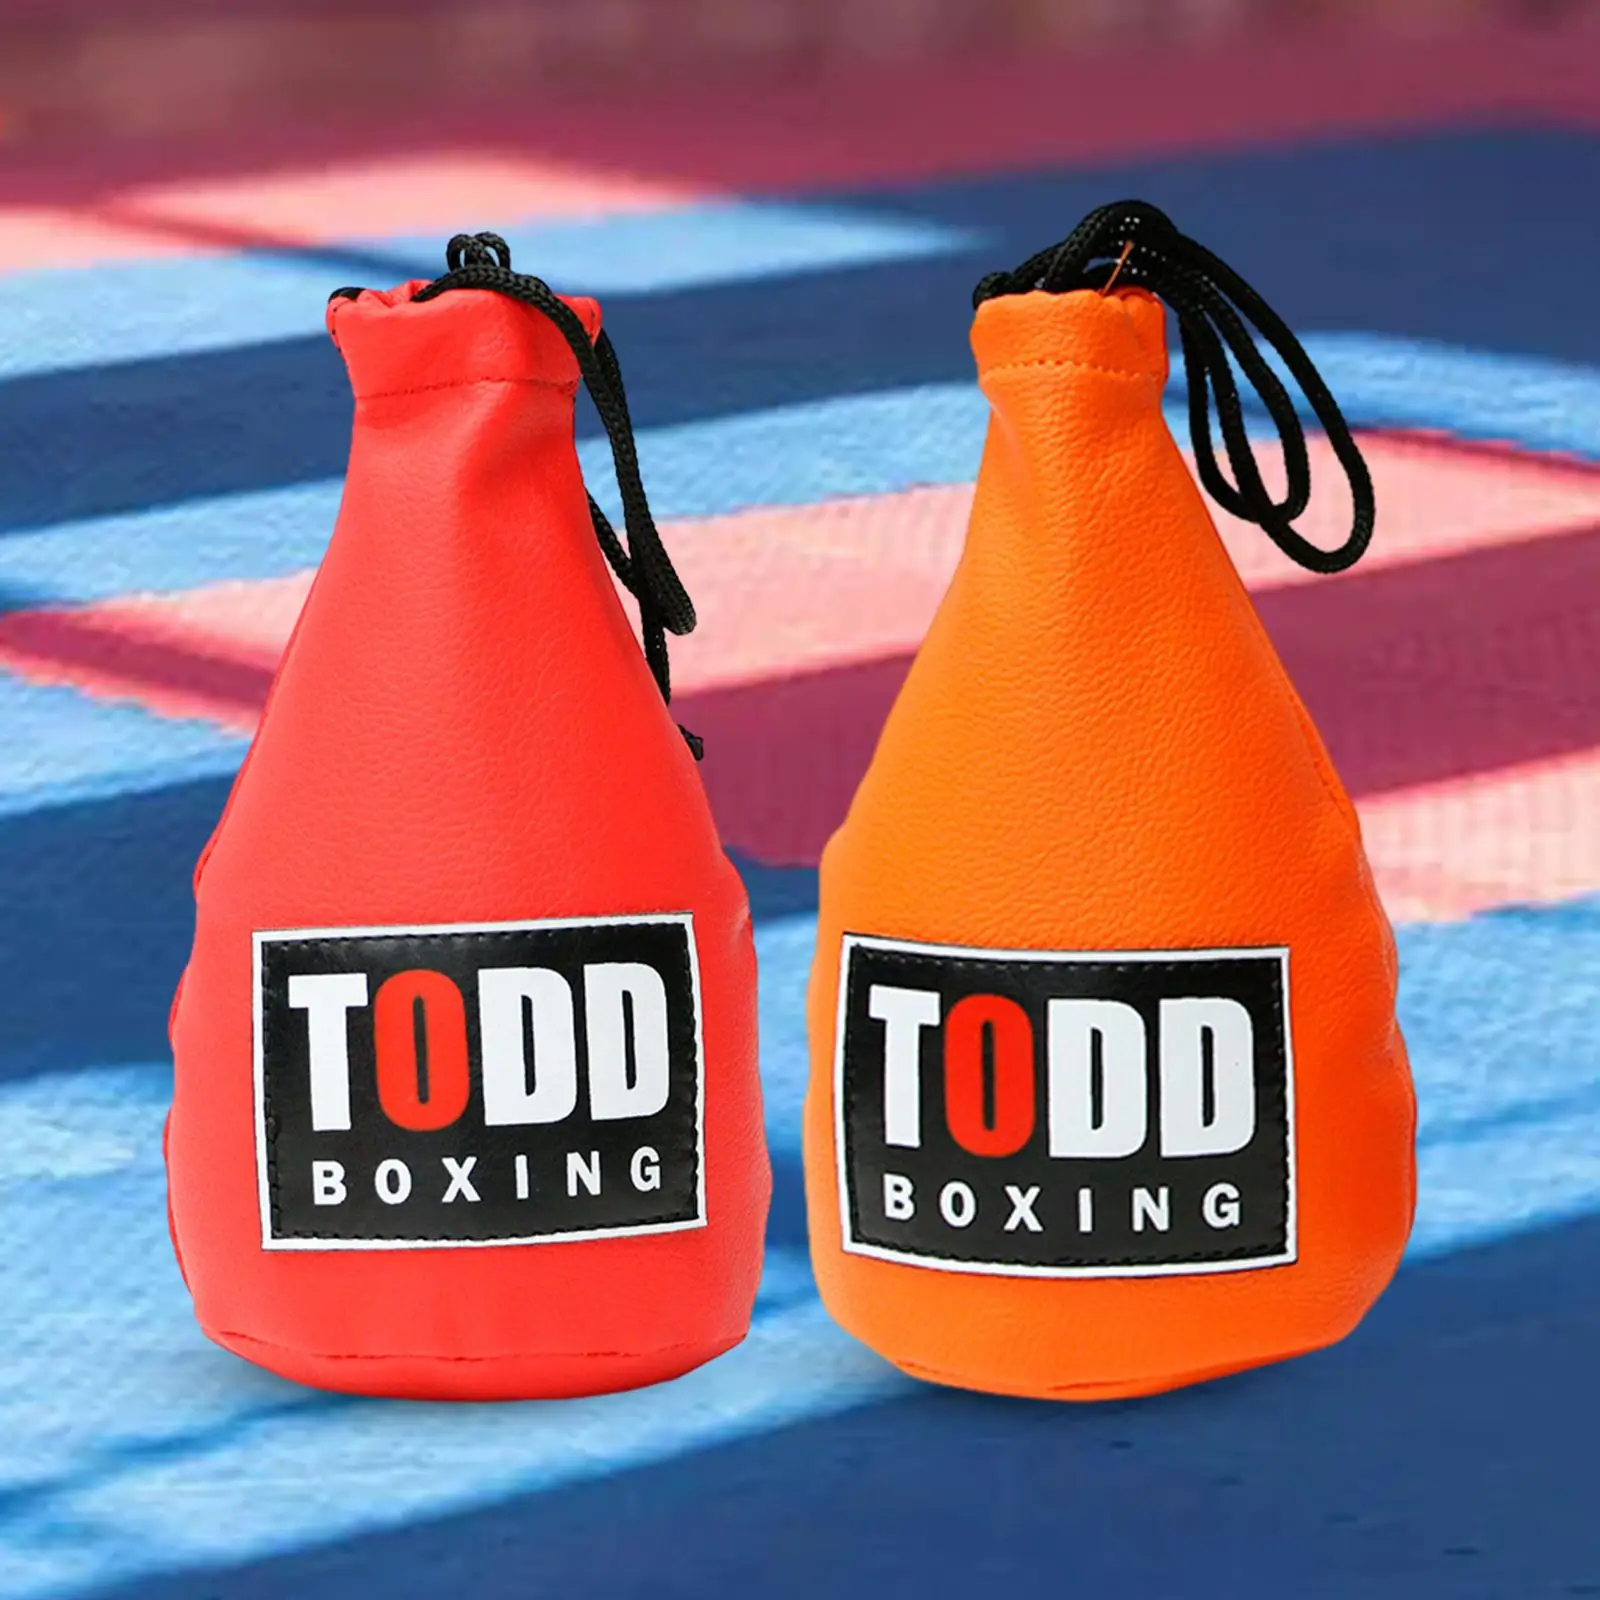 Boxing Dodge Training Bag Hanging Adults for Punching Speed Reaction Sports